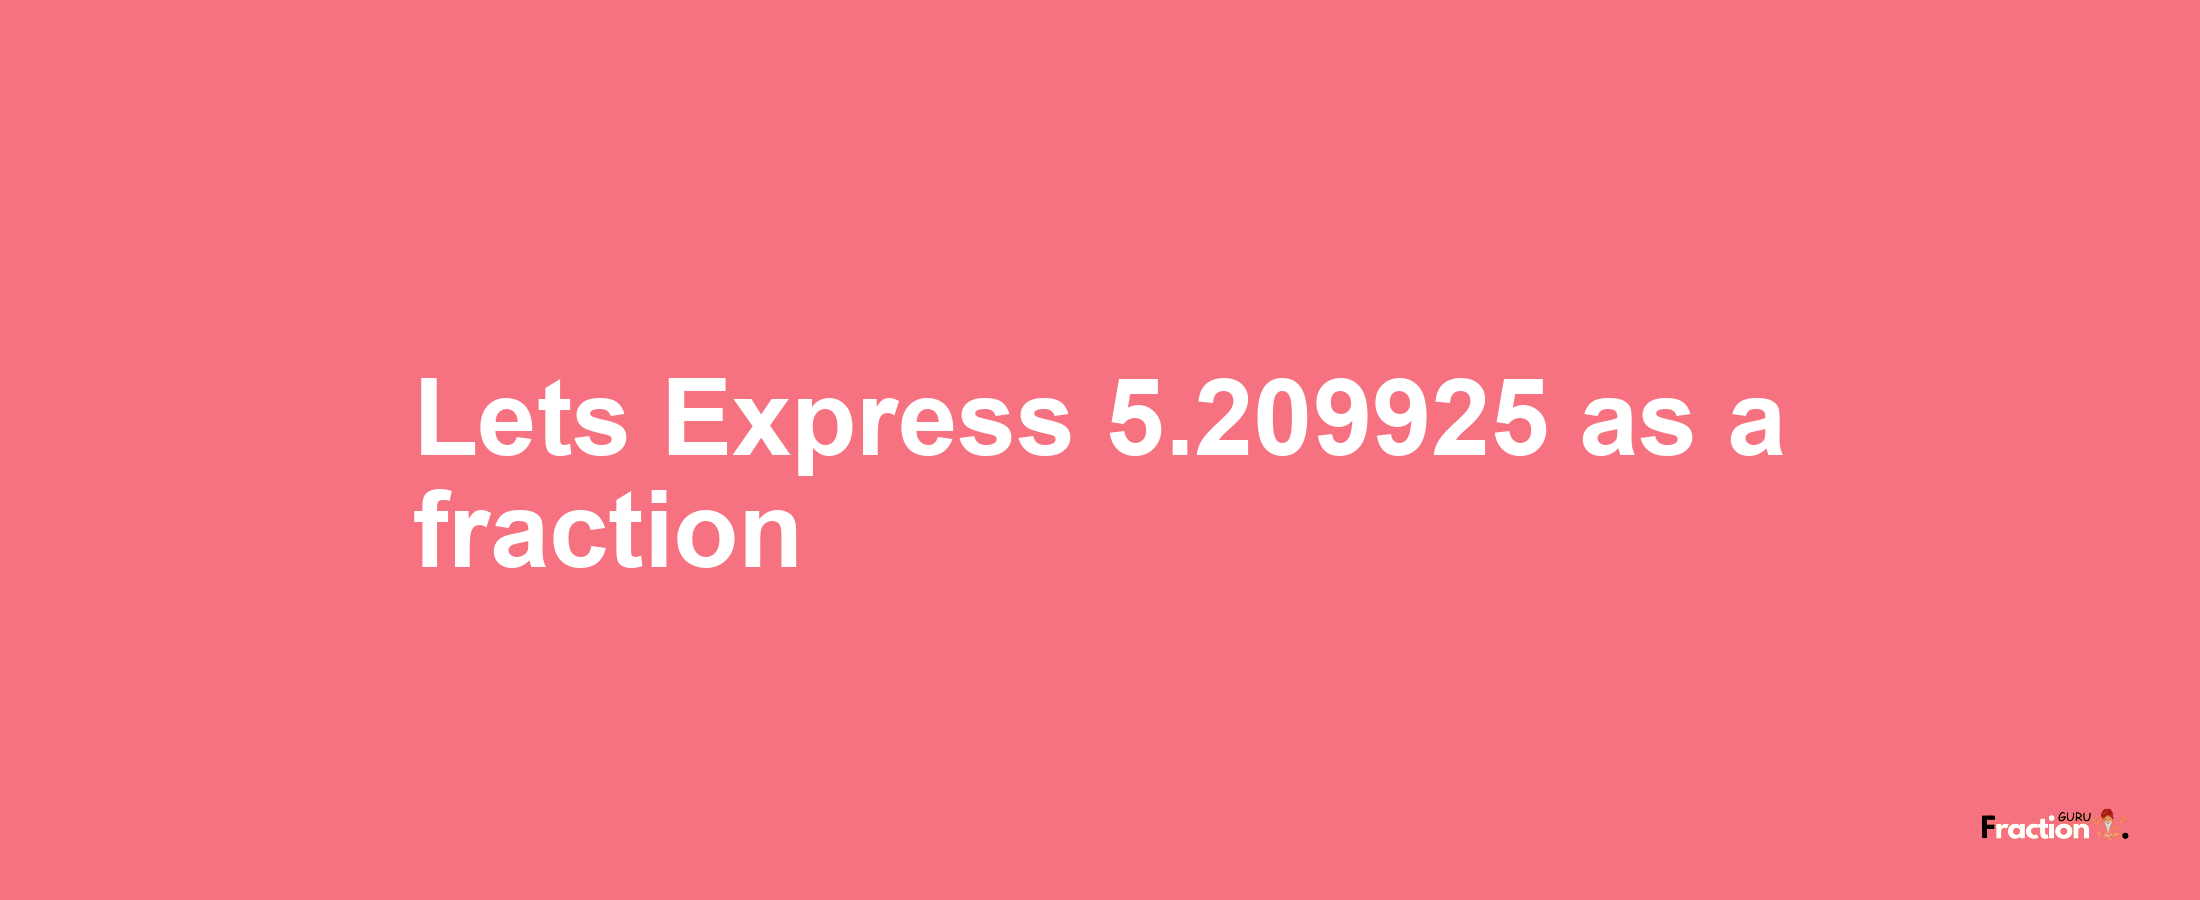 Lets Express 5.209925 as afraction